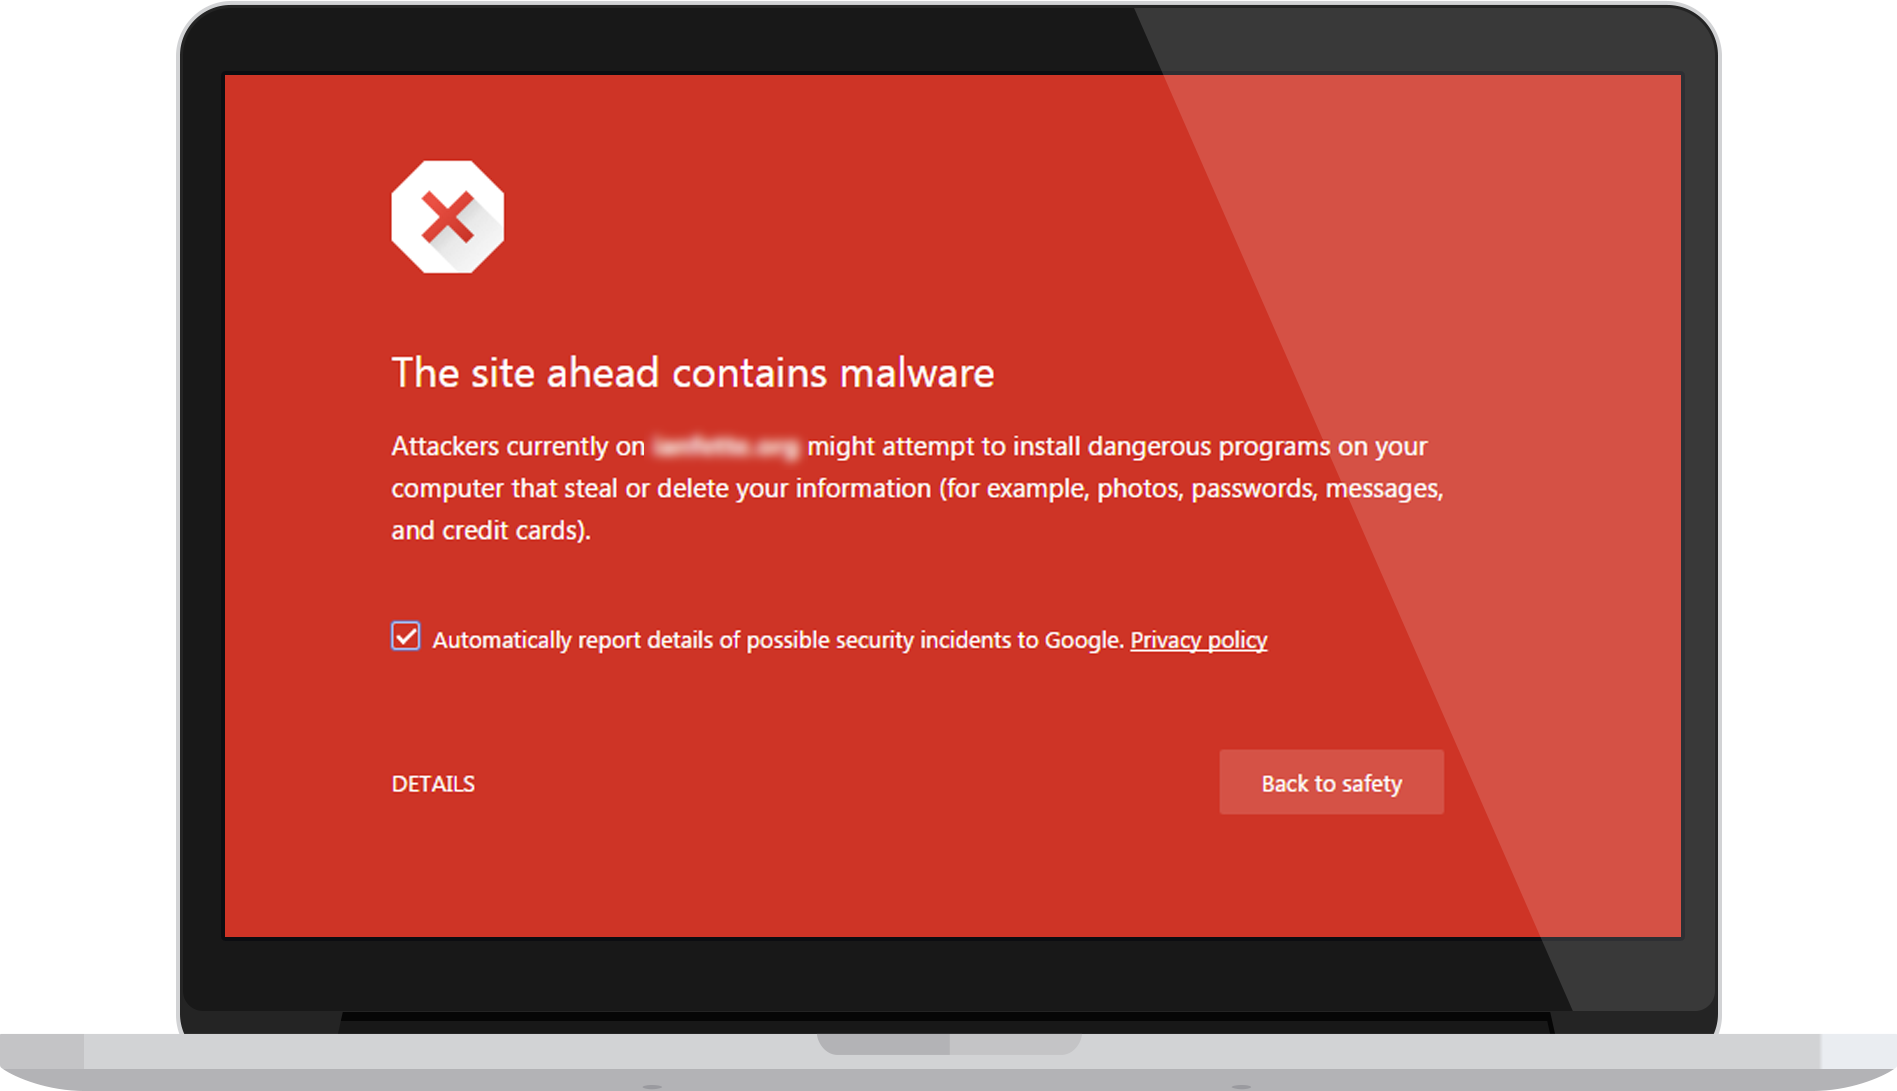 Check for Existing Malware